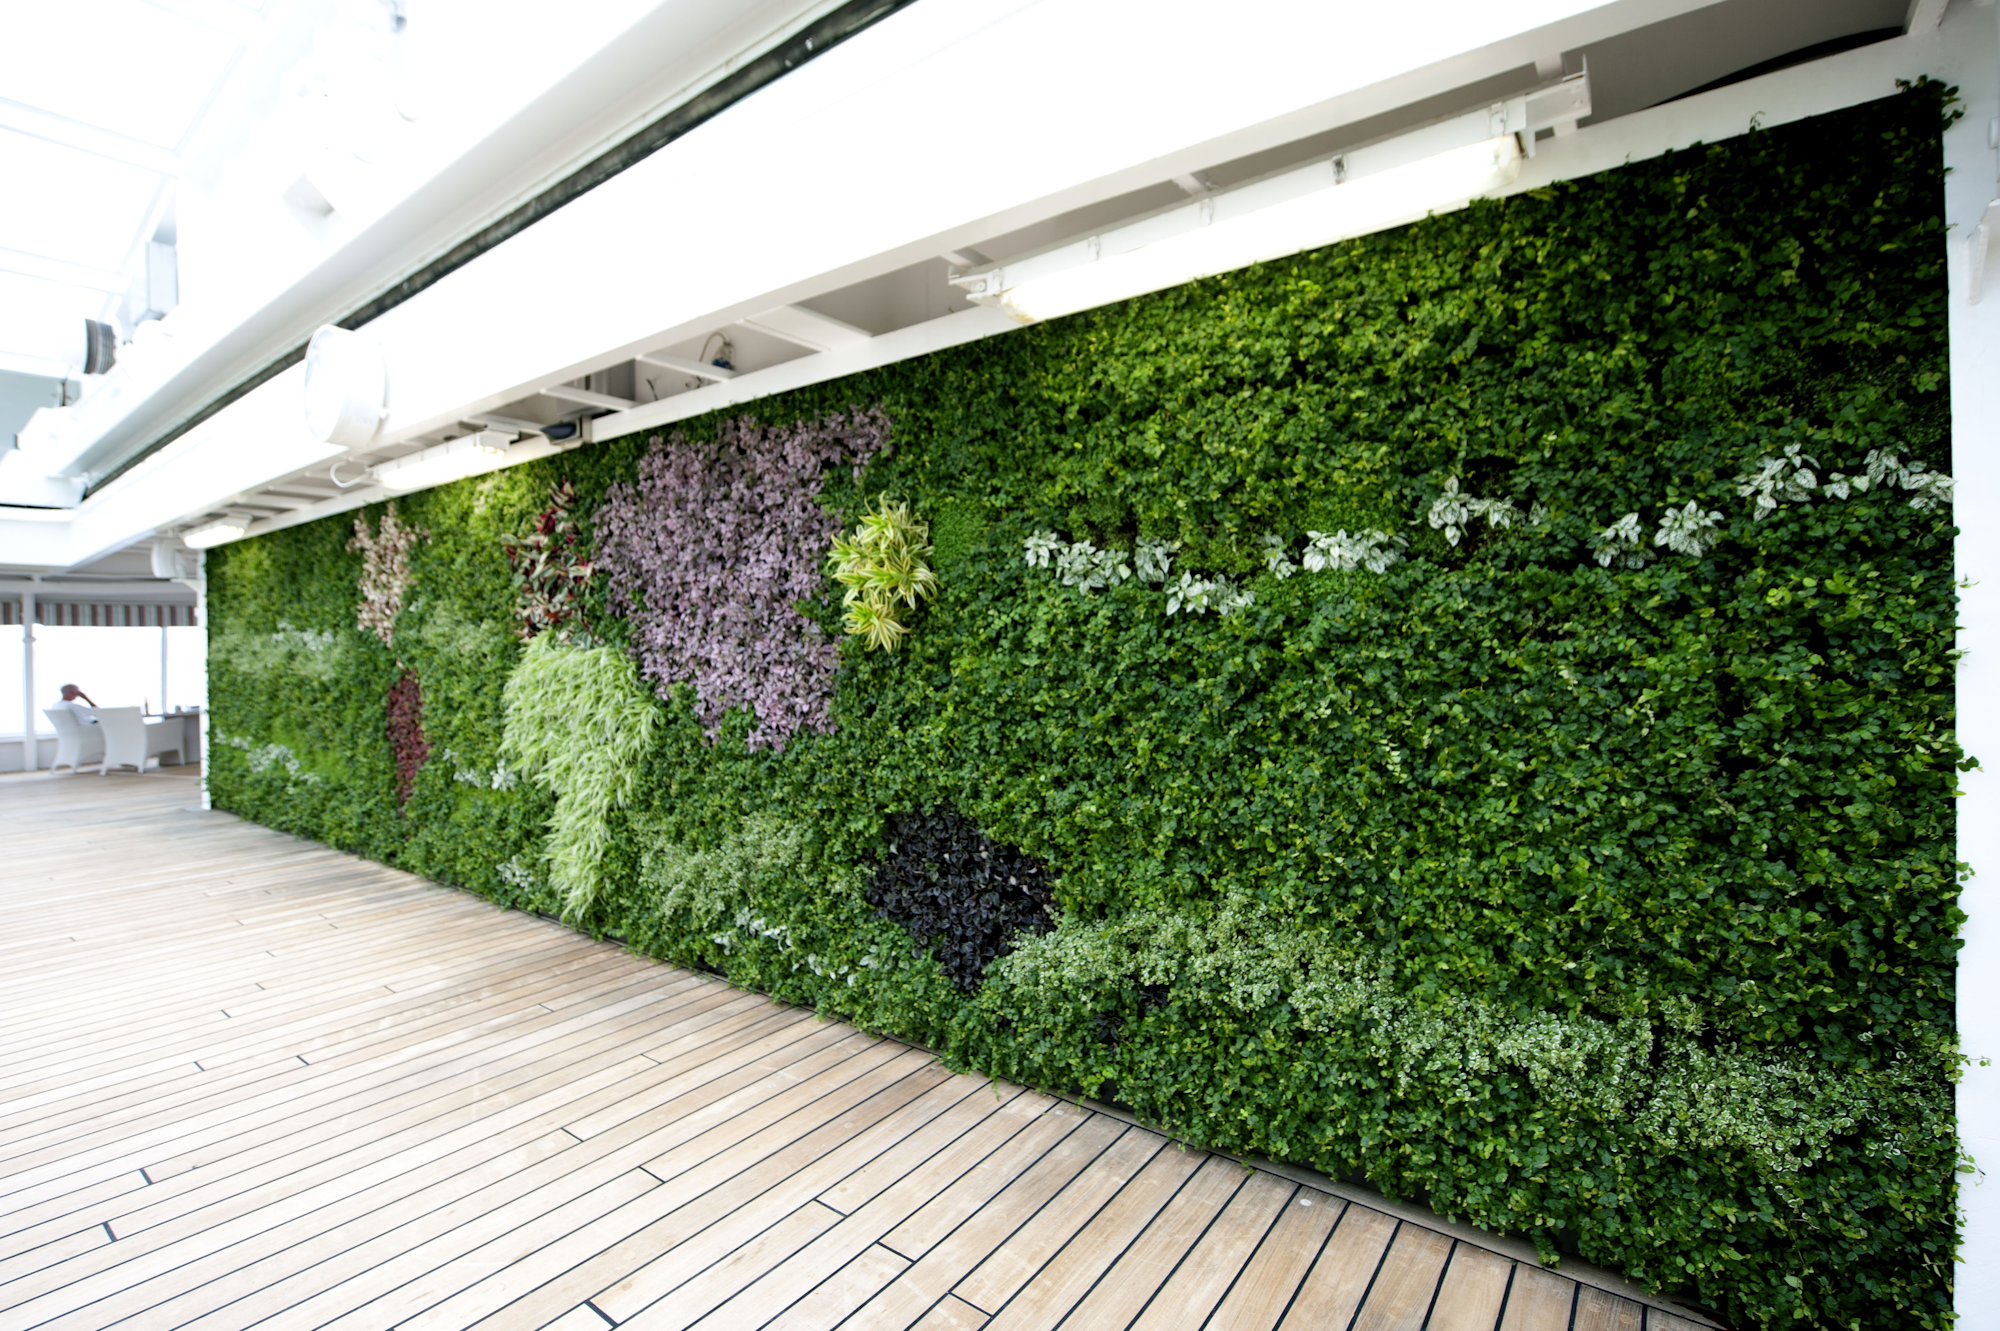 World Map On A Living Wall On Crystal Symphony Cruise Ship